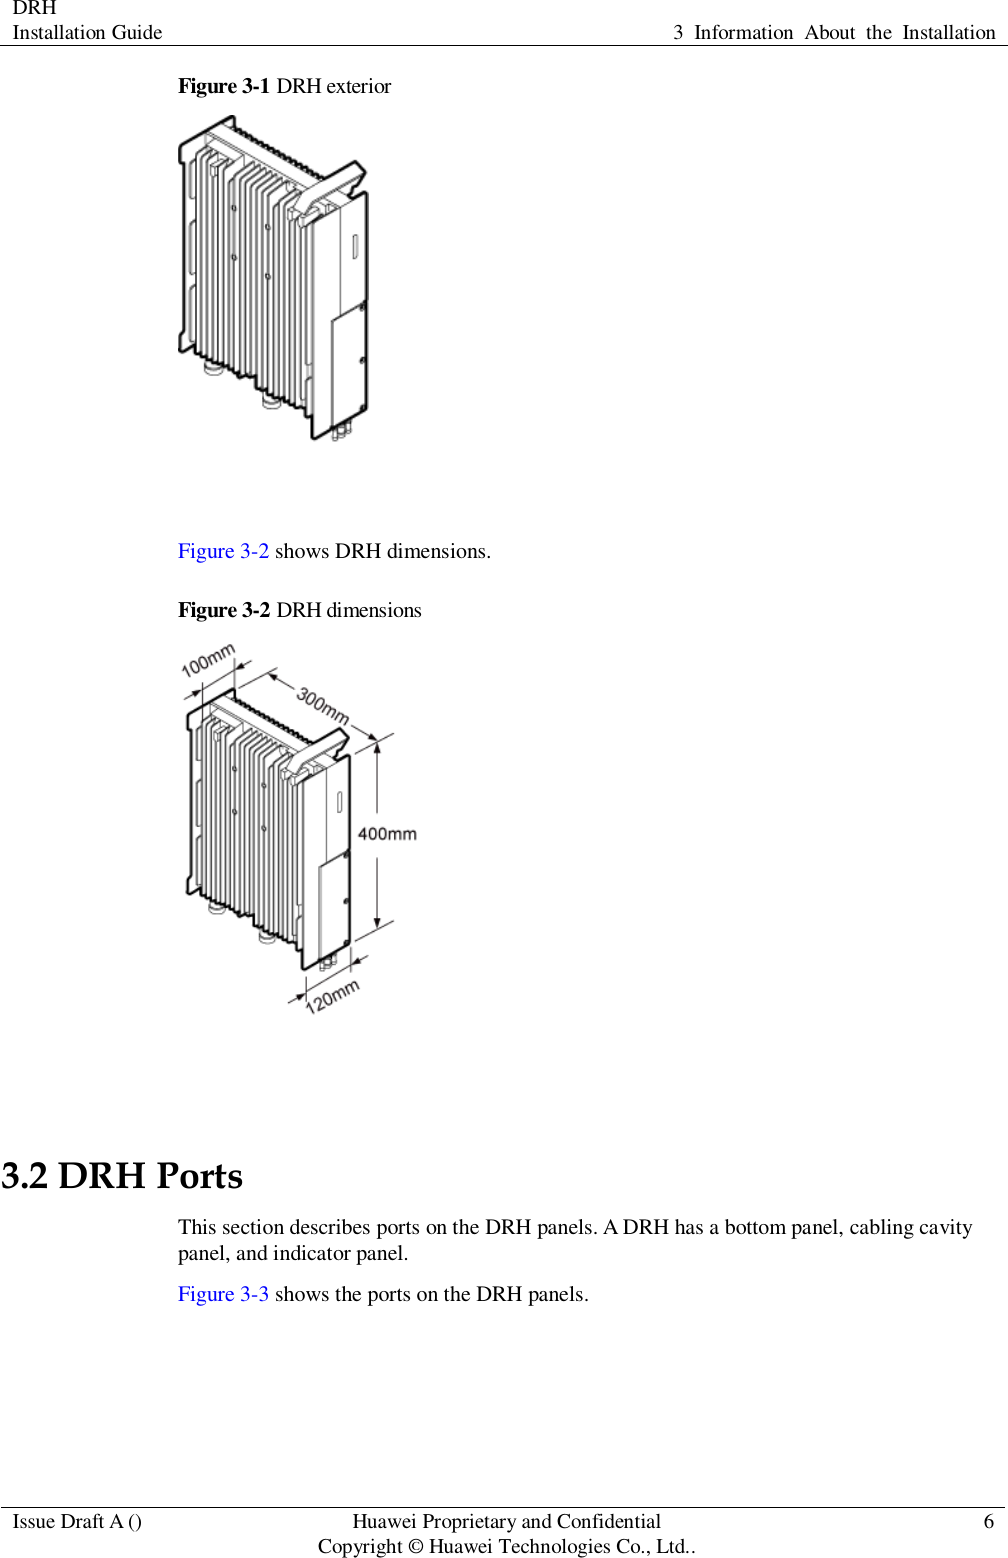 DRH   Installation Guide 3  Information  About  the  Installation  Issue Draft A () Huawei Proprietary and Confidential                                     Copyright © Huawei Technologies Co., Ltd.. 6  Figure 3-1 DRH exterior   Figure 3-2 shows DRH dimensions. Figure 3-2  DRH dimensions   3.2 DRH Ports This section describes ports on the DRH panels. A DRH has a bottom panel, cabling cavity panel, and indicator panel. Figure 3-3 shows the ports on the DRH panels. 